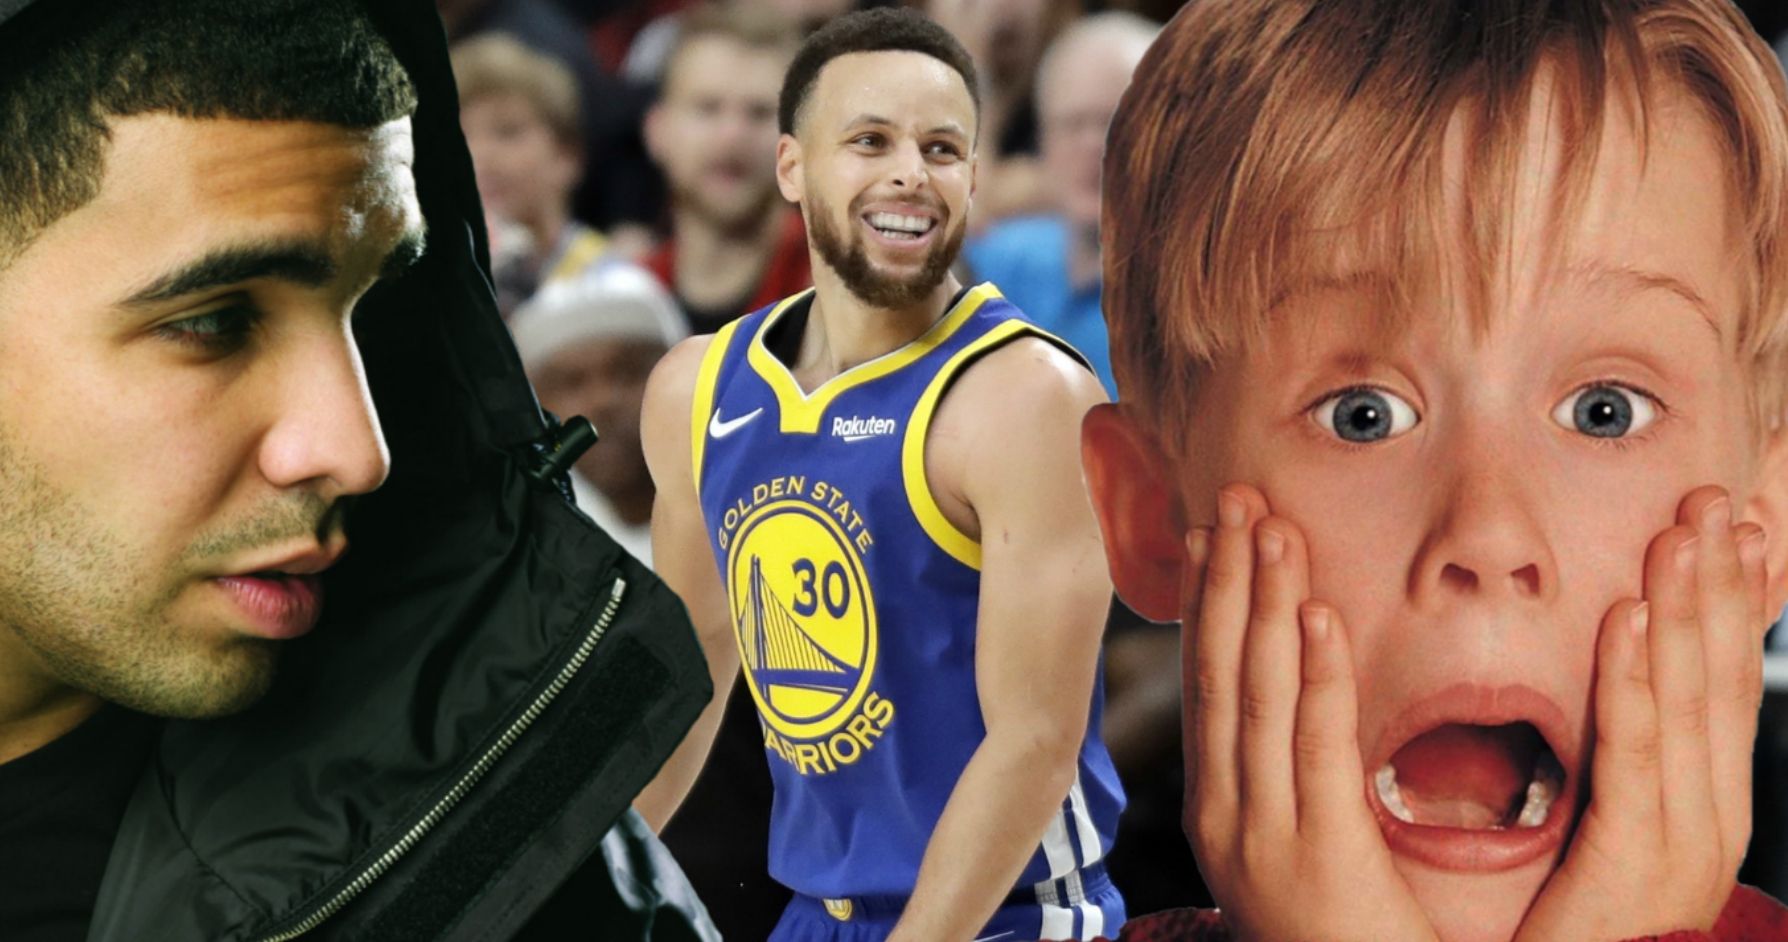 Drake's Home Alone Themed NBA Finals Trolling Sparks Reaction from Macaulay Culkin